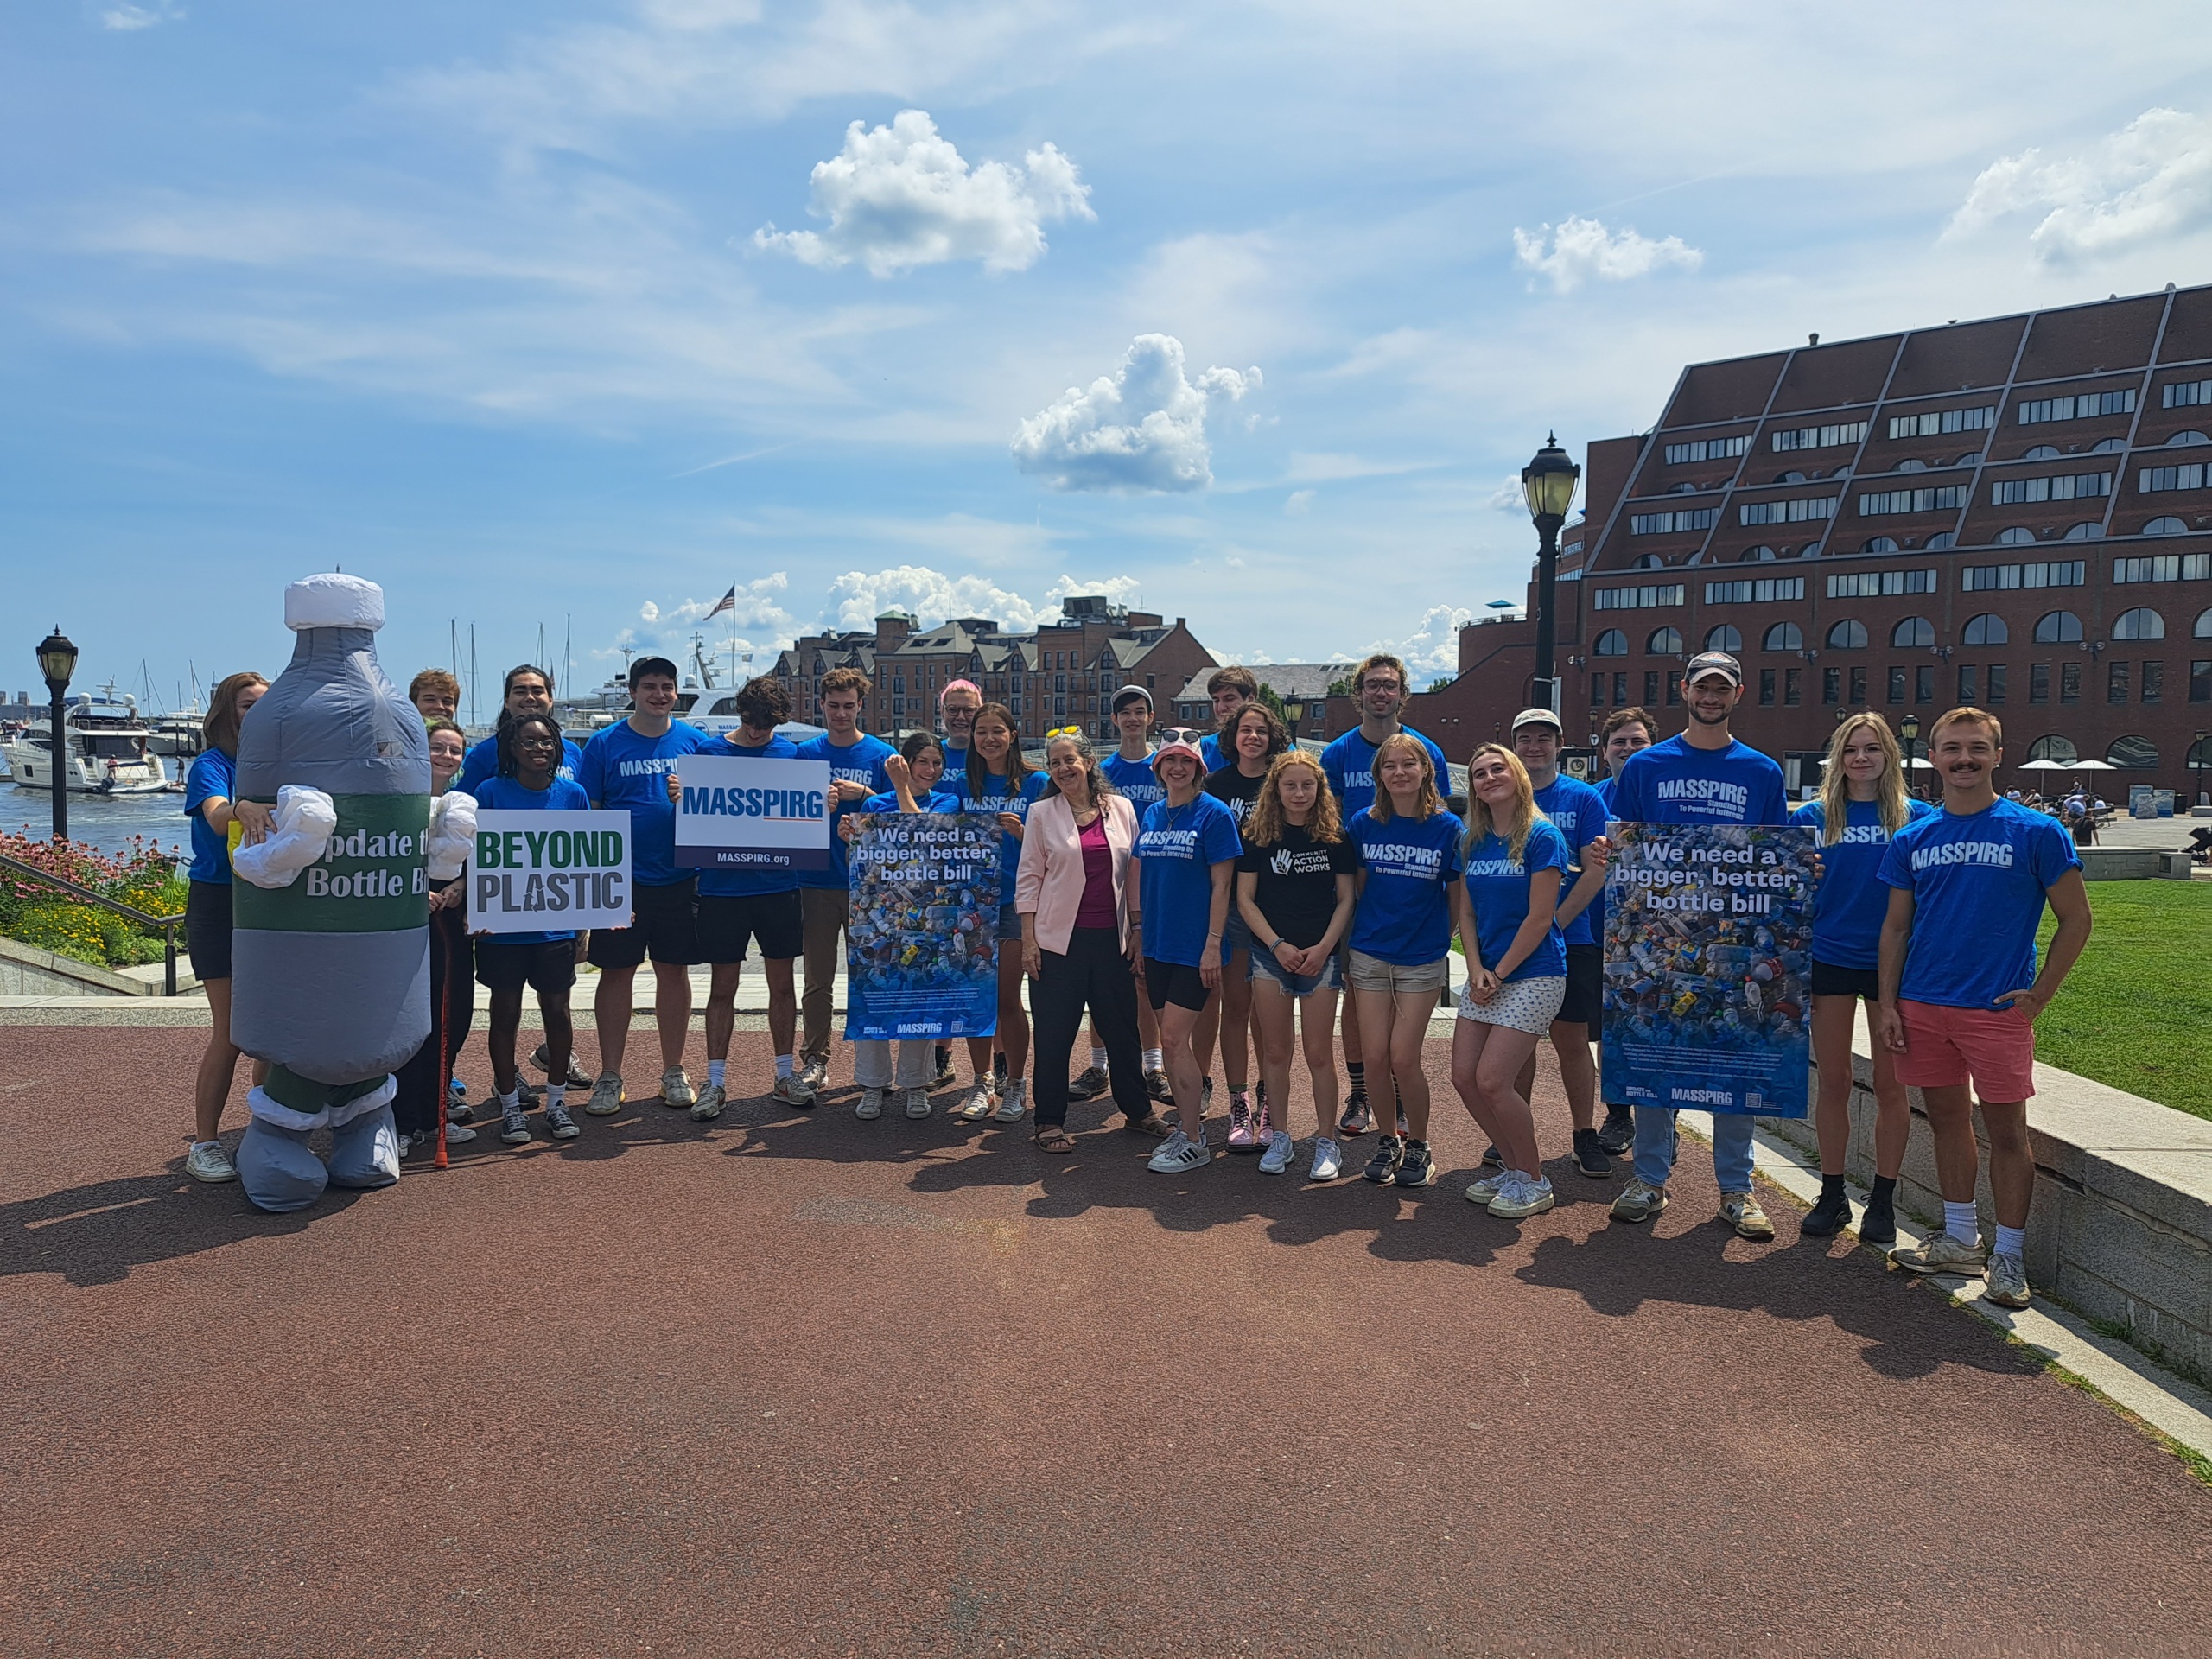 MA canvass event on Updated Bottle Bill